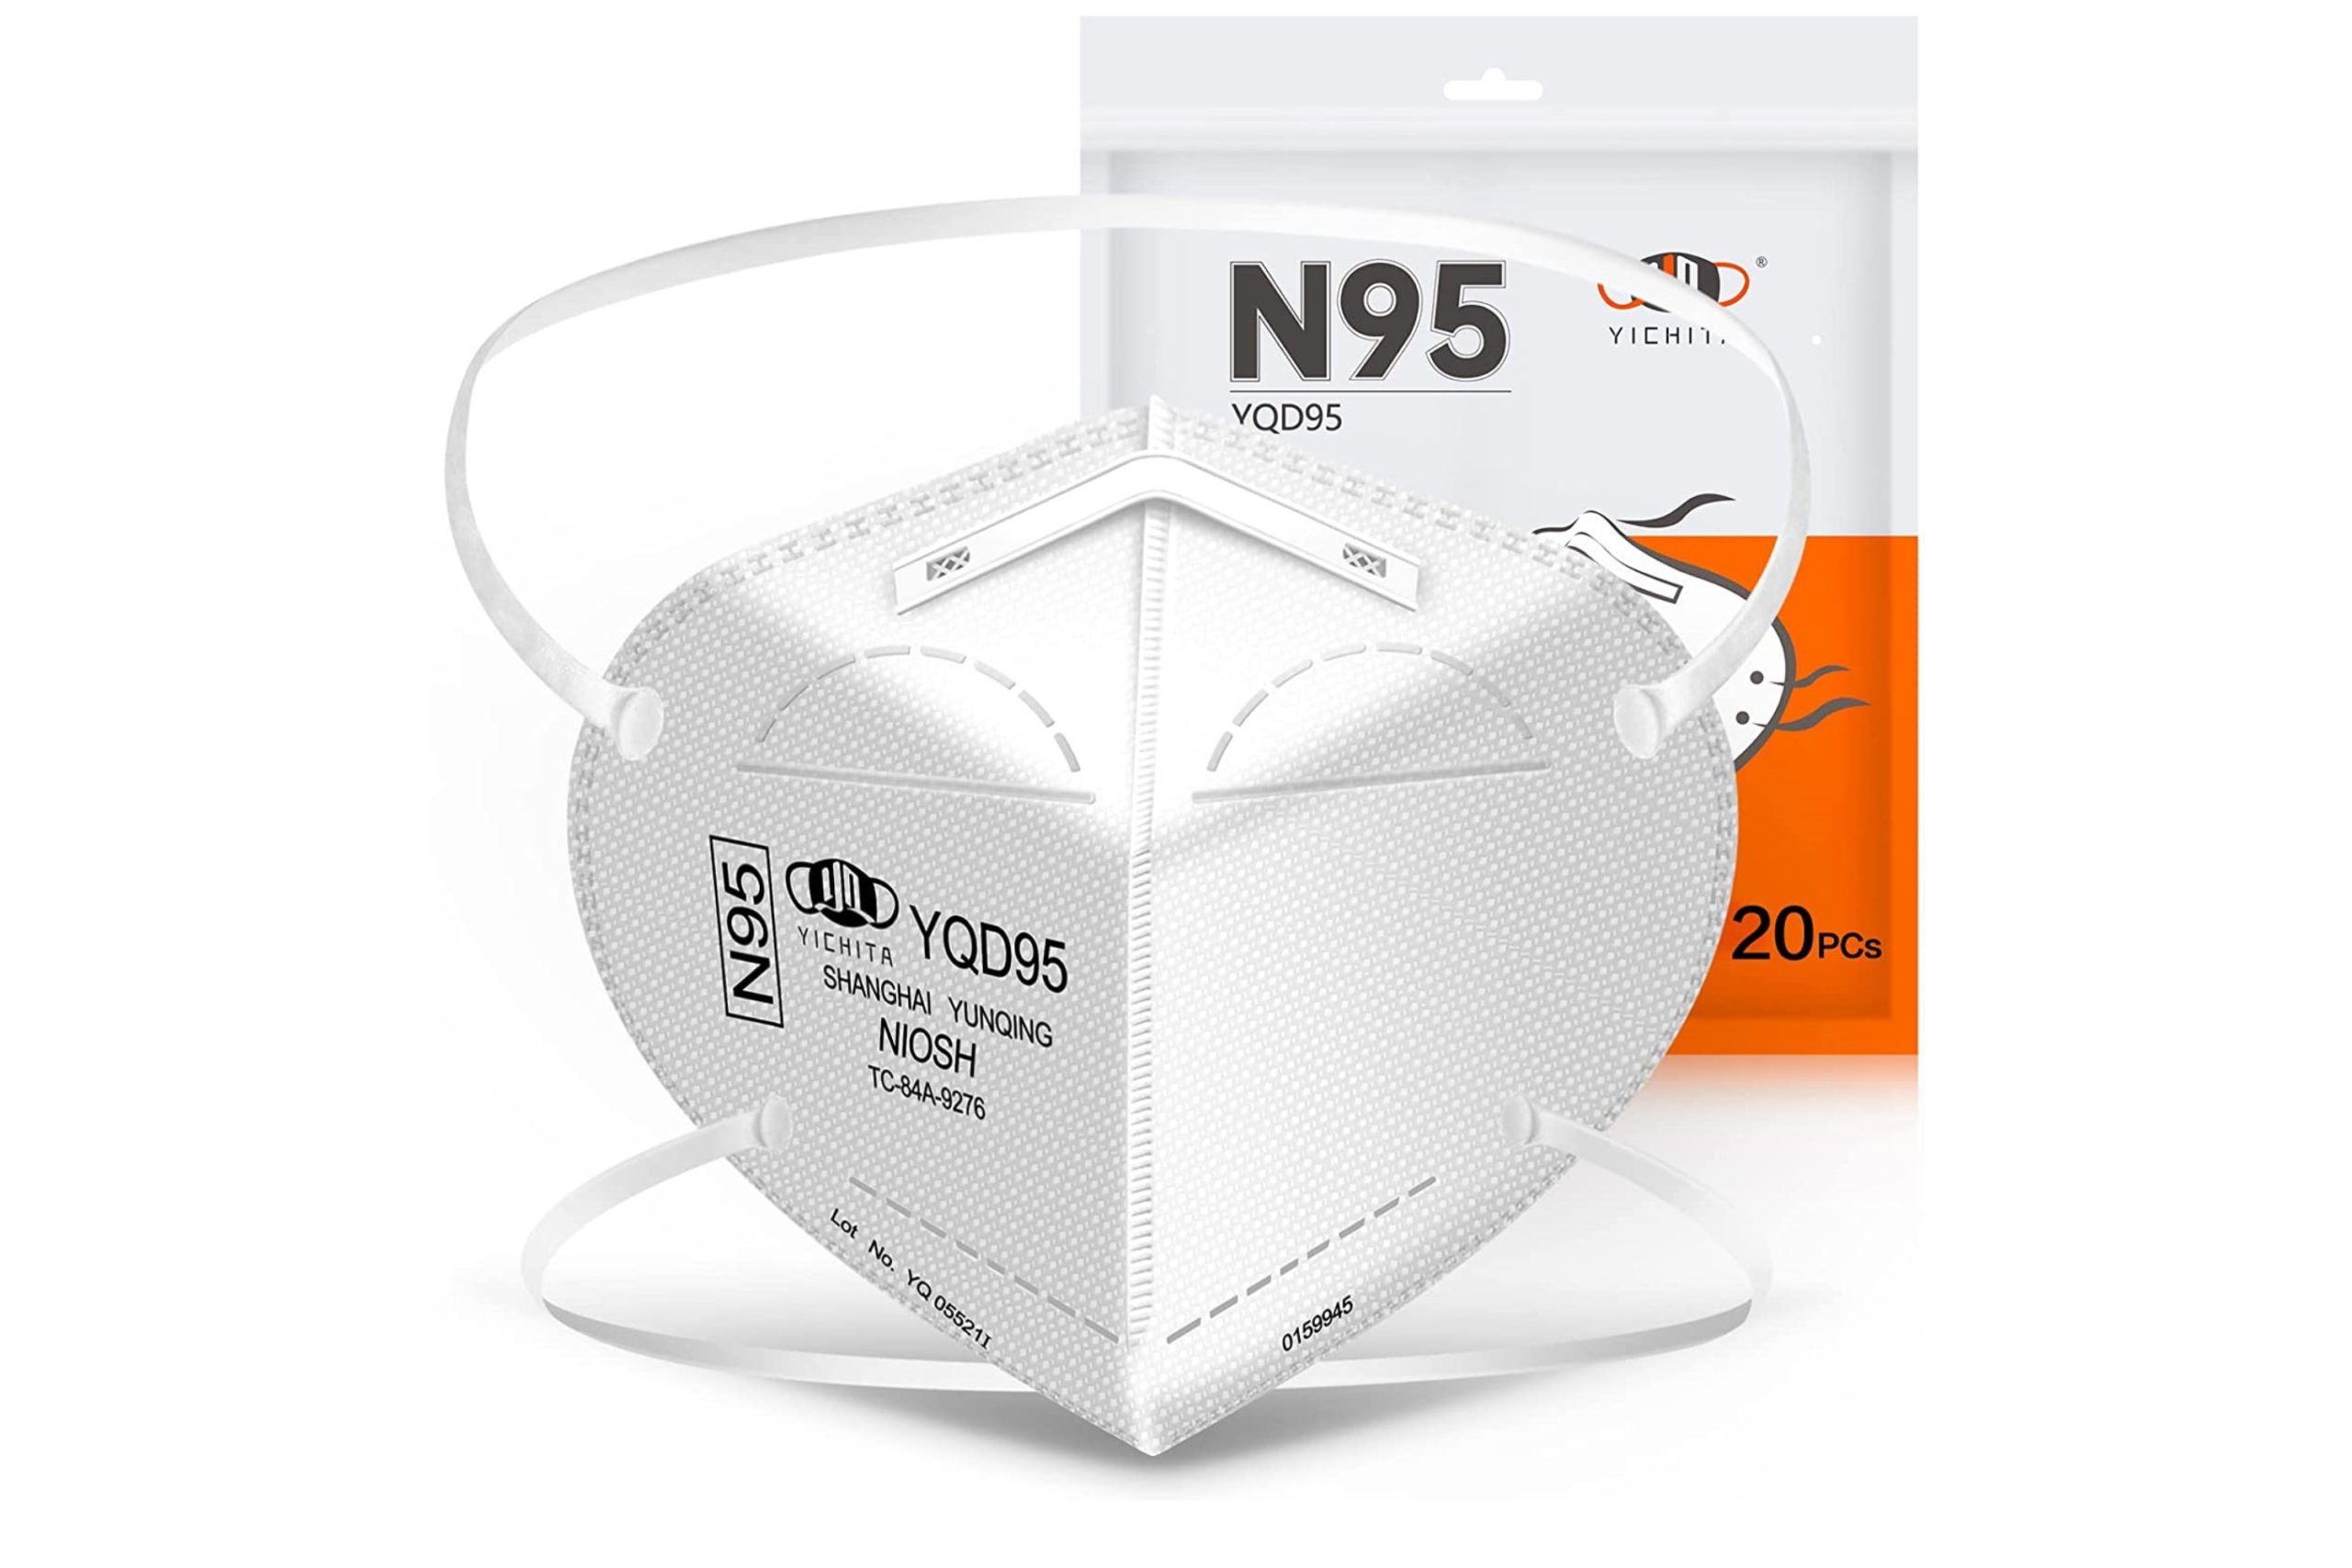 white N95 mask product is displayed with packaging is di